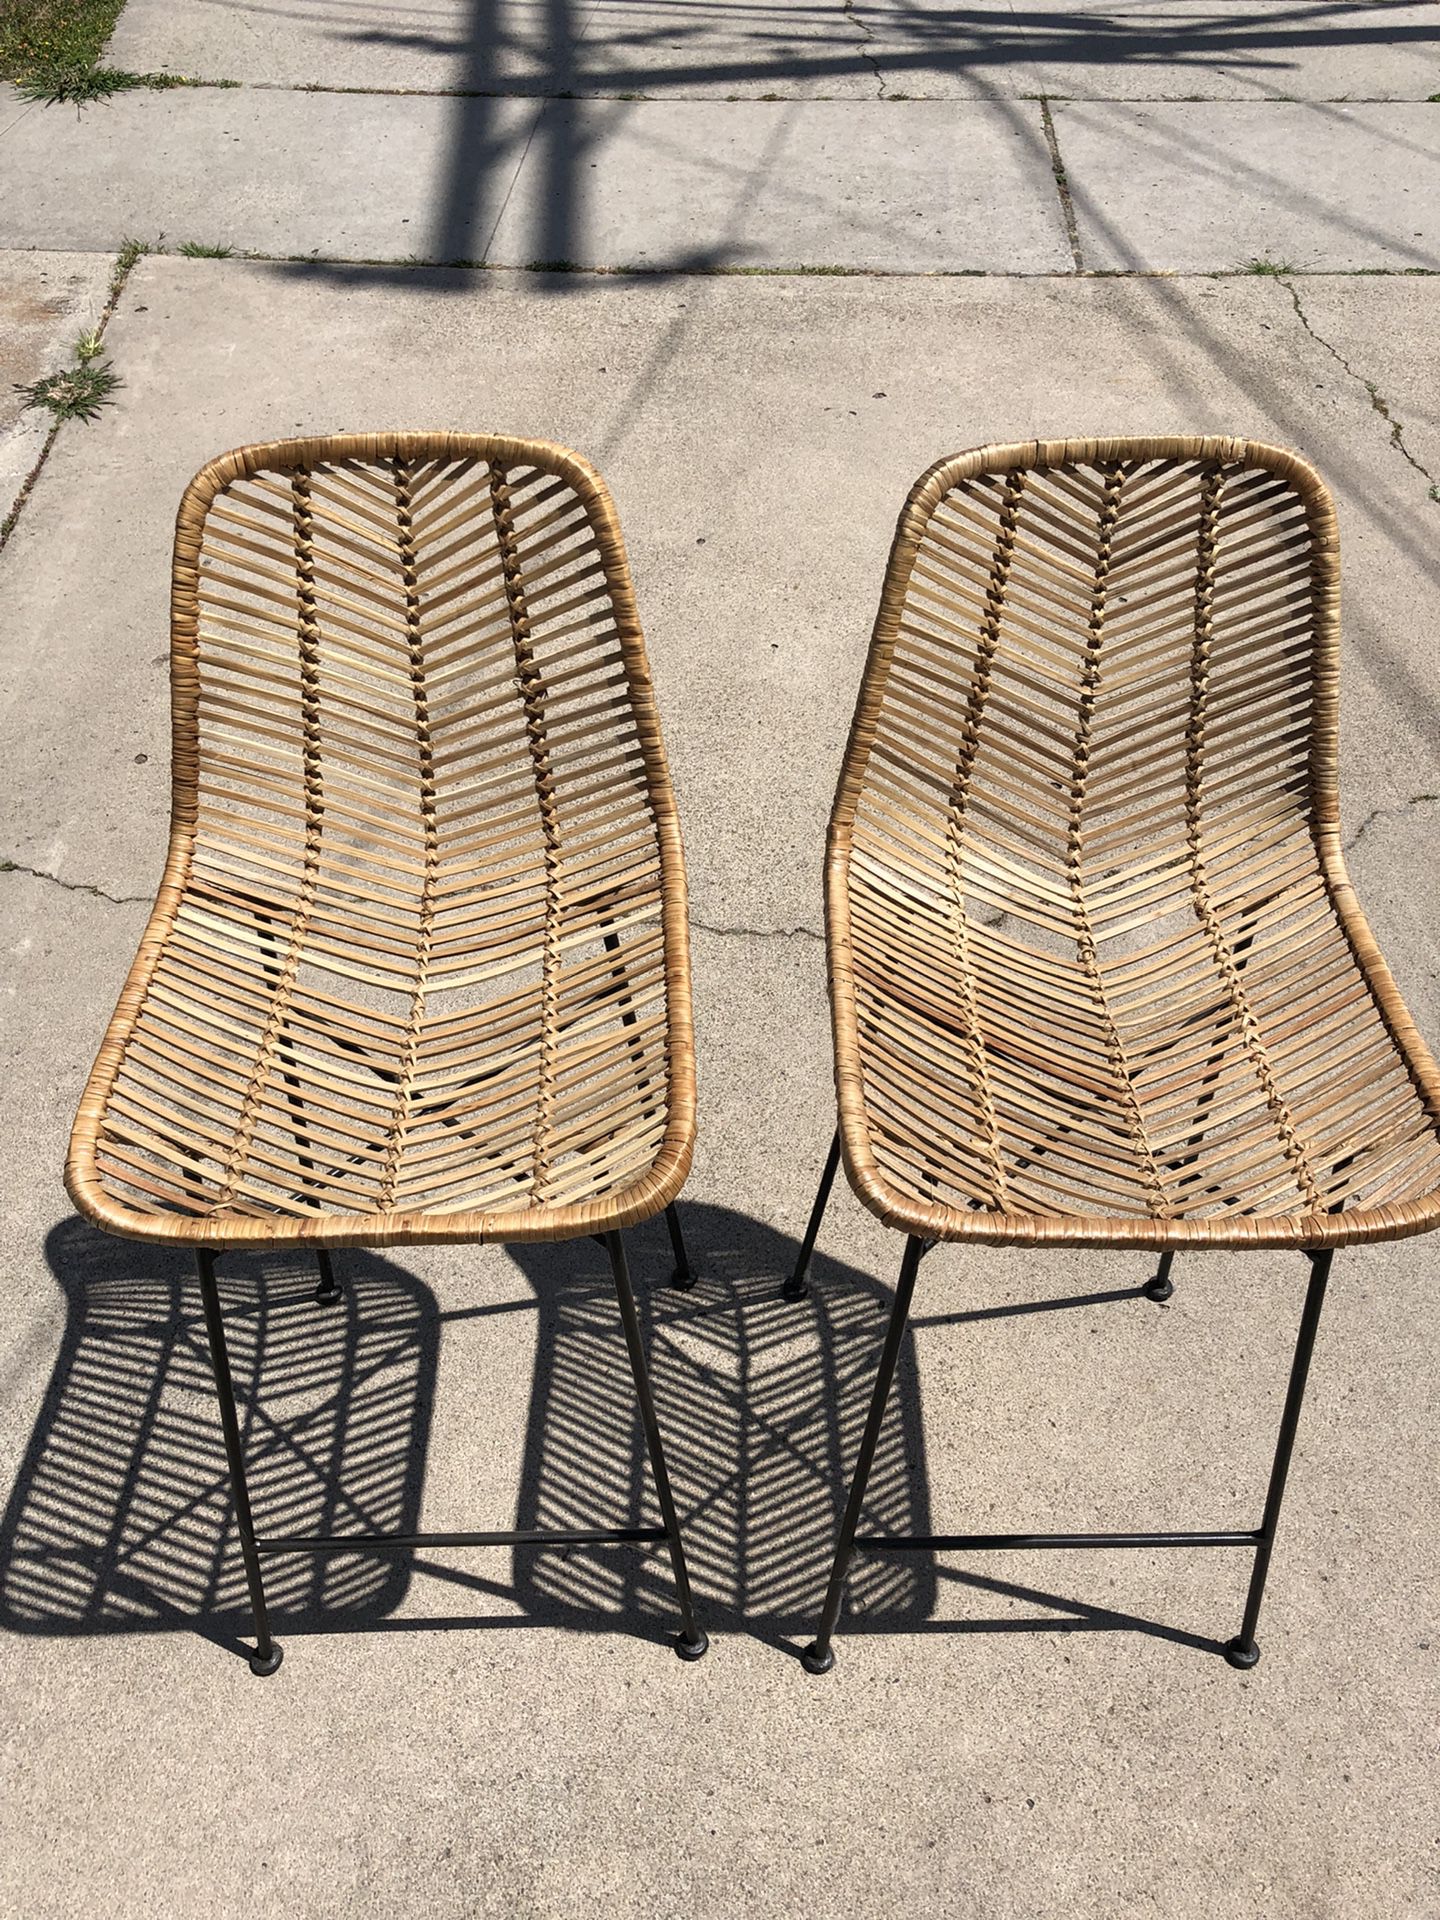 Wooden Wicker Bar Stool Chairs